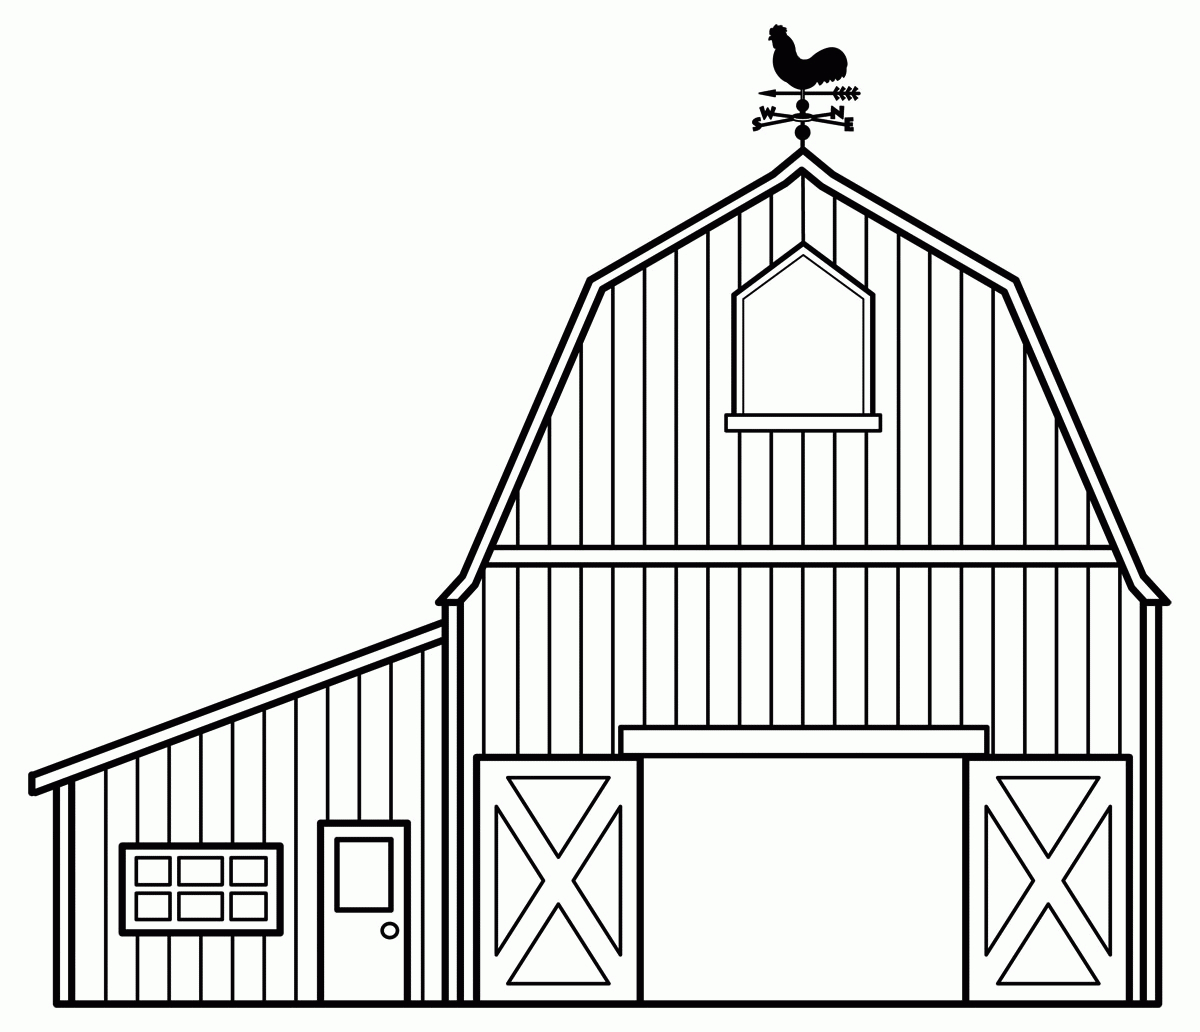 Barn Coloring Page - Coloring Pages For Kids And For Adults - Free Printable Barn Coloring Pages